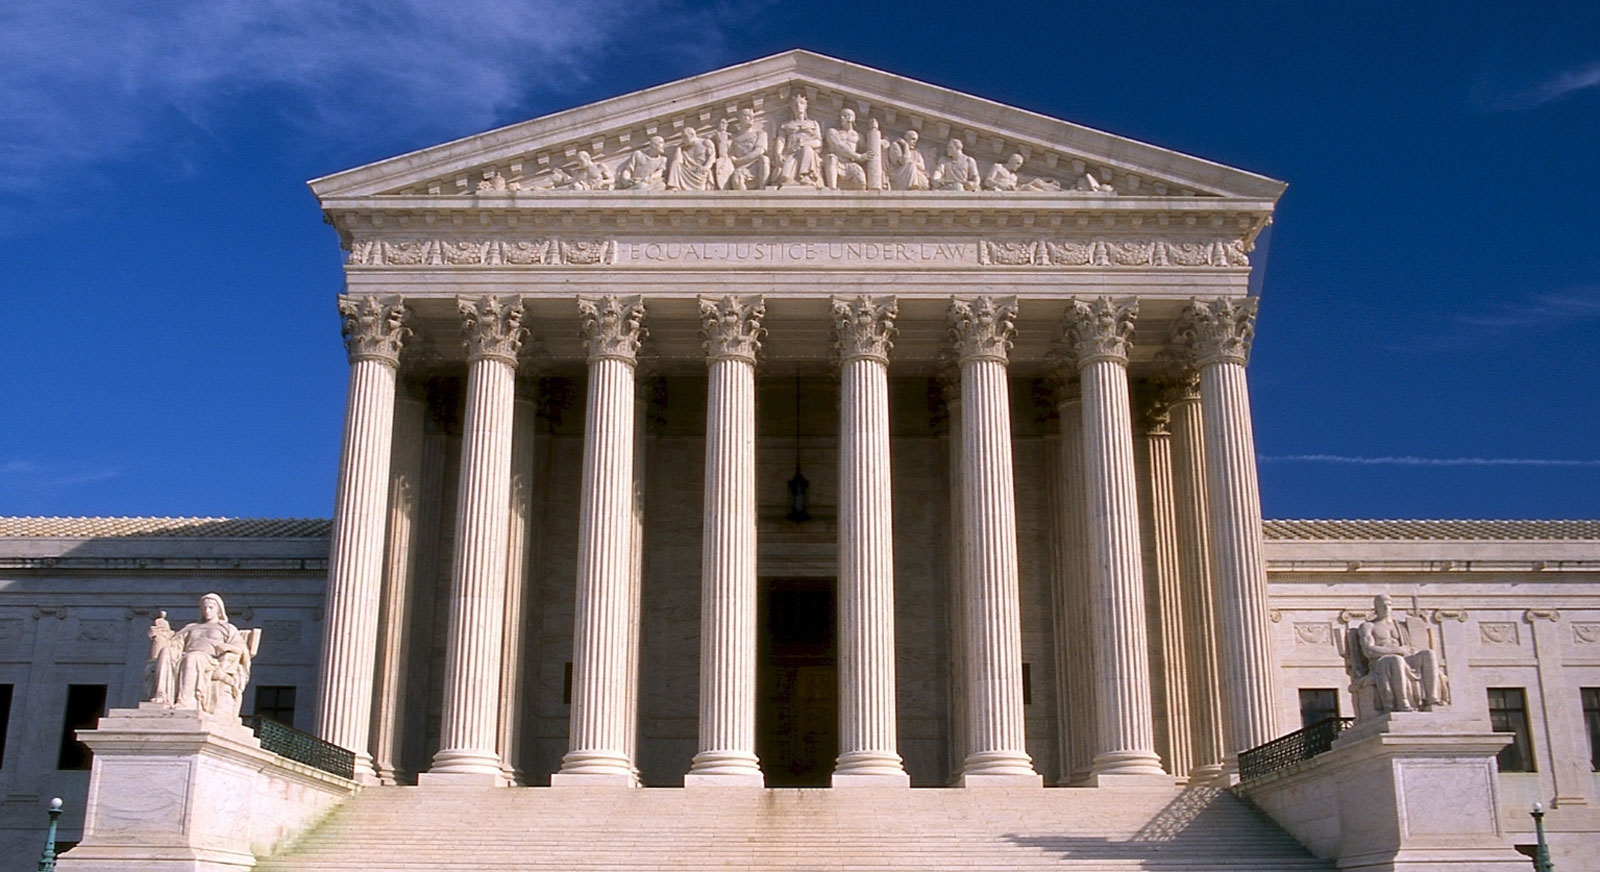 Three Employment Law Issues on the Supreme Court Docket